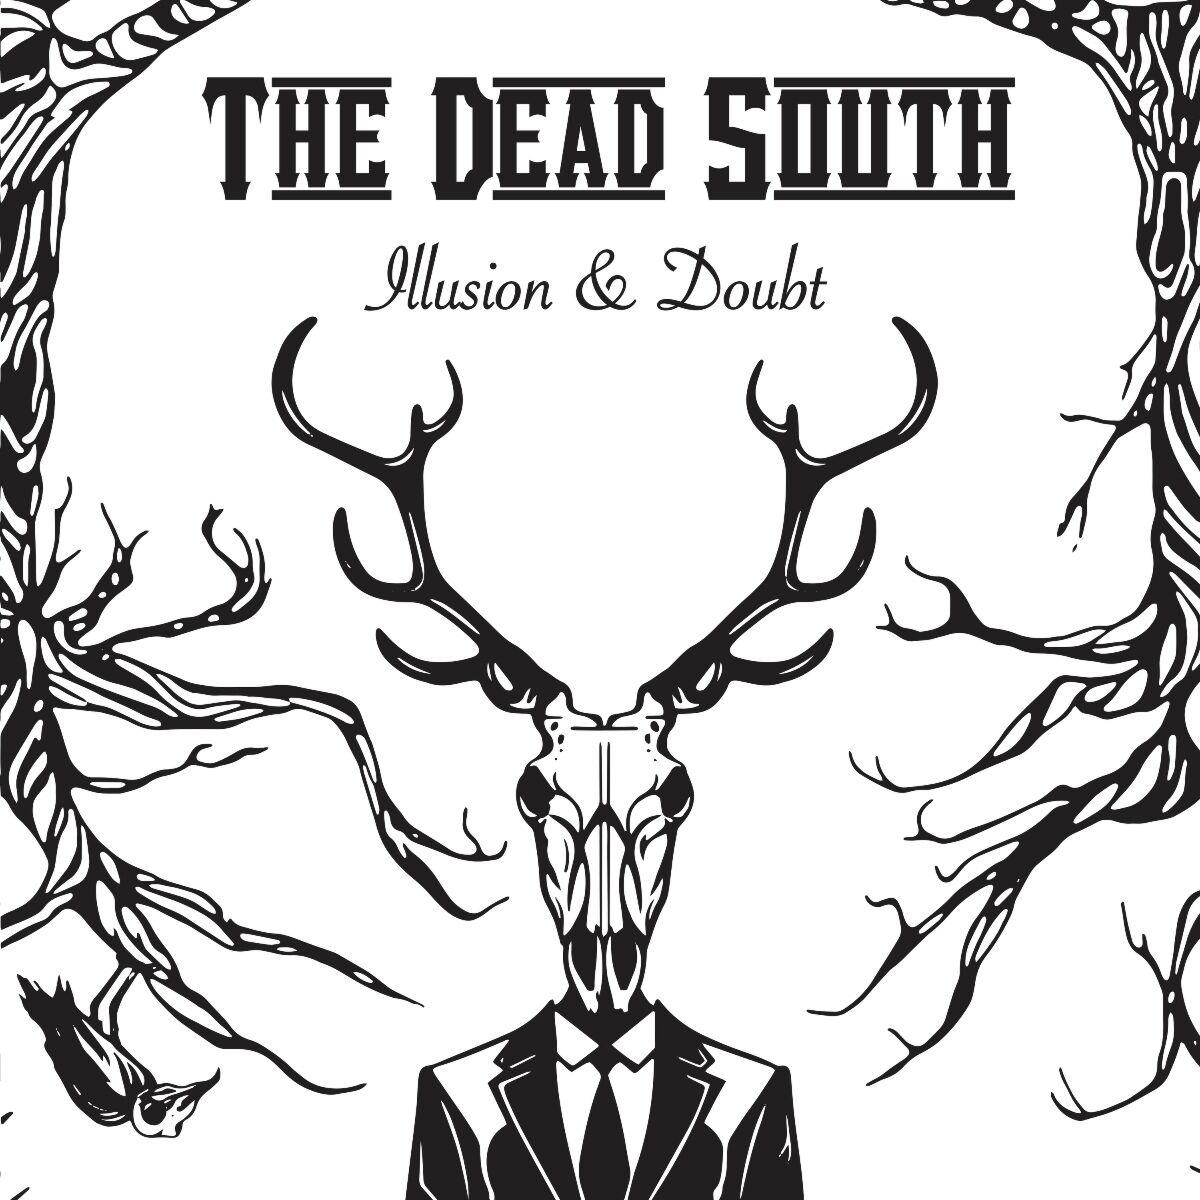 Dead South Illusion and Doubt  (фирм.)